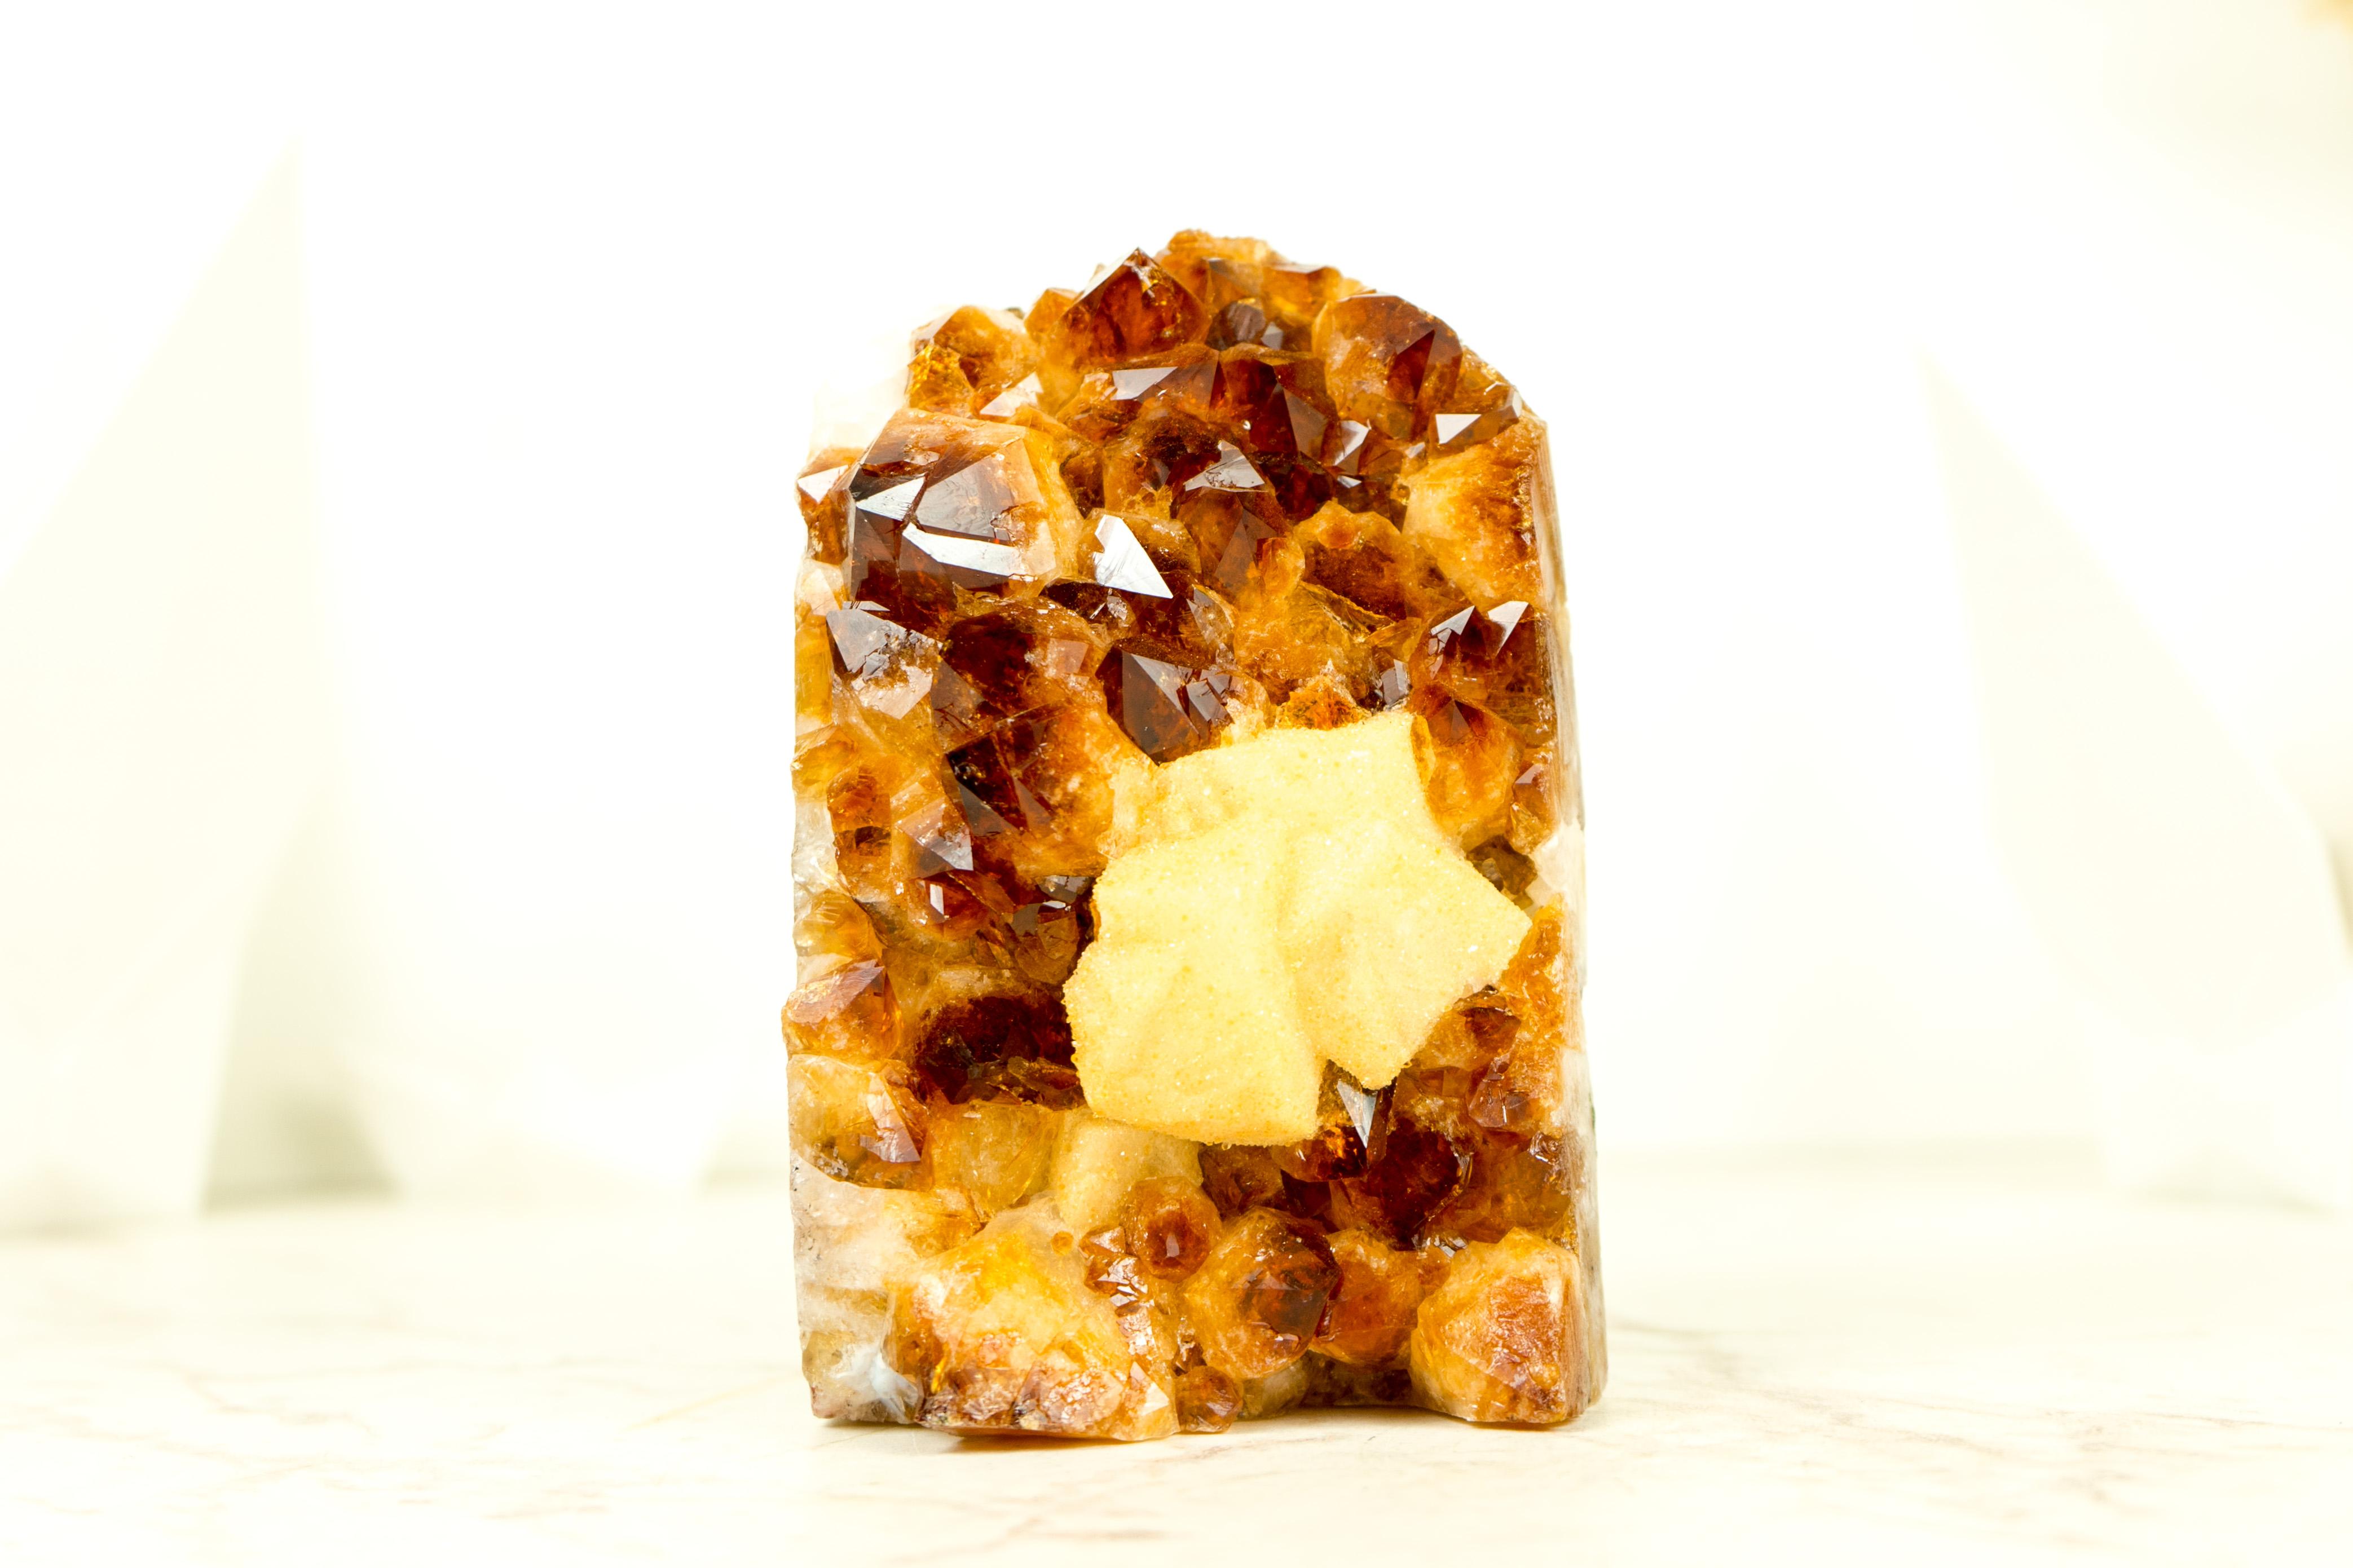 An Amber Citrine Cluster that brings world-class citrine color, rare geometrical calcite covered by Sugar Druzy, and gorgeous aesthetics. This small yet gorgeous crystal promises to be a stunning addition to your office table, home decor, or crystal